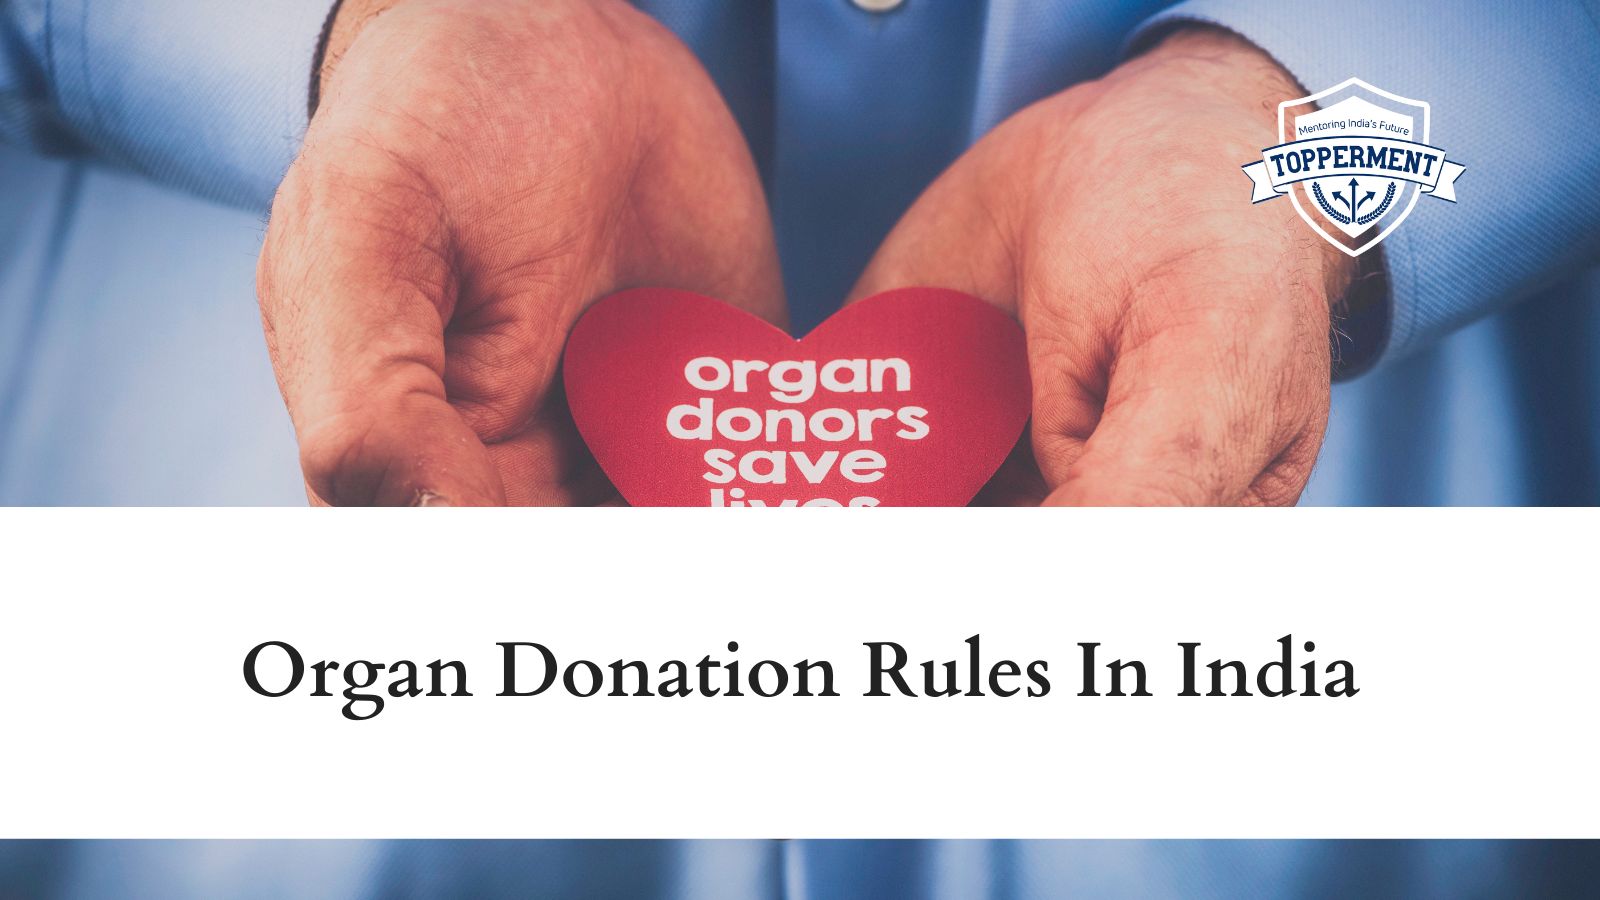 Organ-Donation-Rules-In-India-Best-UPSC-IAS-Coaching-For-Mentorship-And-Guidance